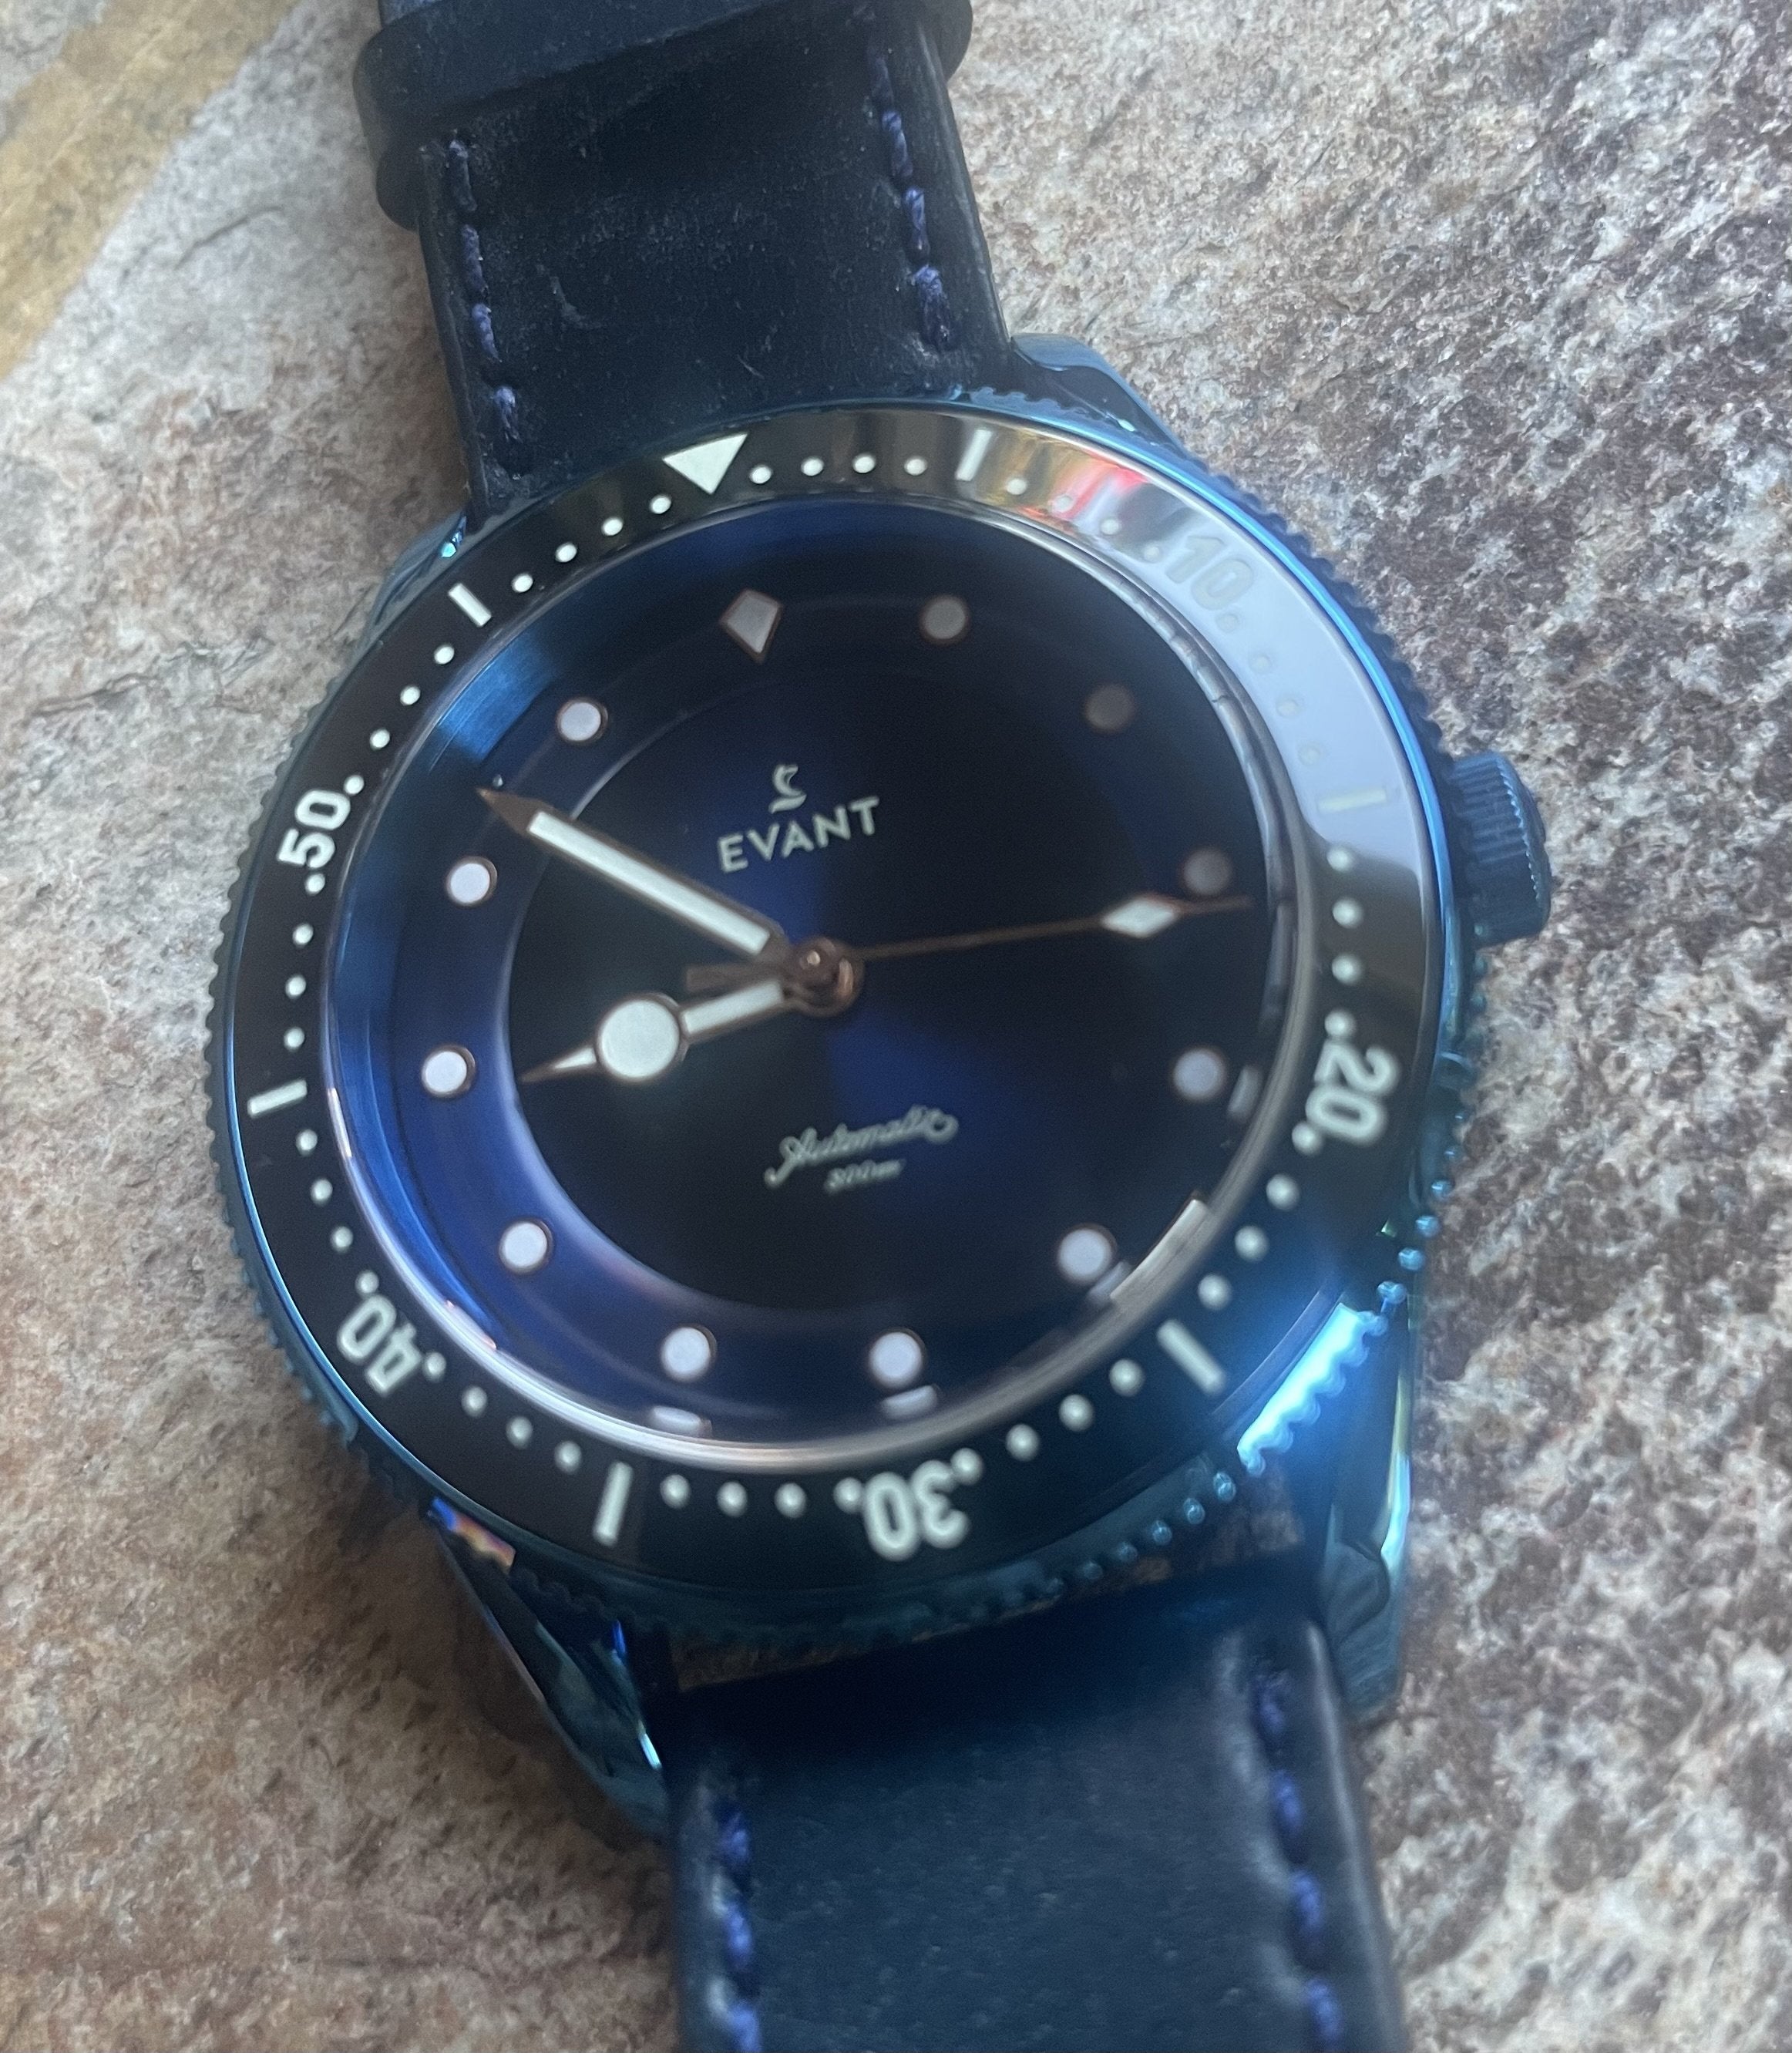 My Eastern Watch Collection: EVANT Decodiver Fume Black Limited Production  Dive Watch (similar to Decodiver Fume Sky Blue) - A Flexible Watch that can  be Worn in the Sea as well as